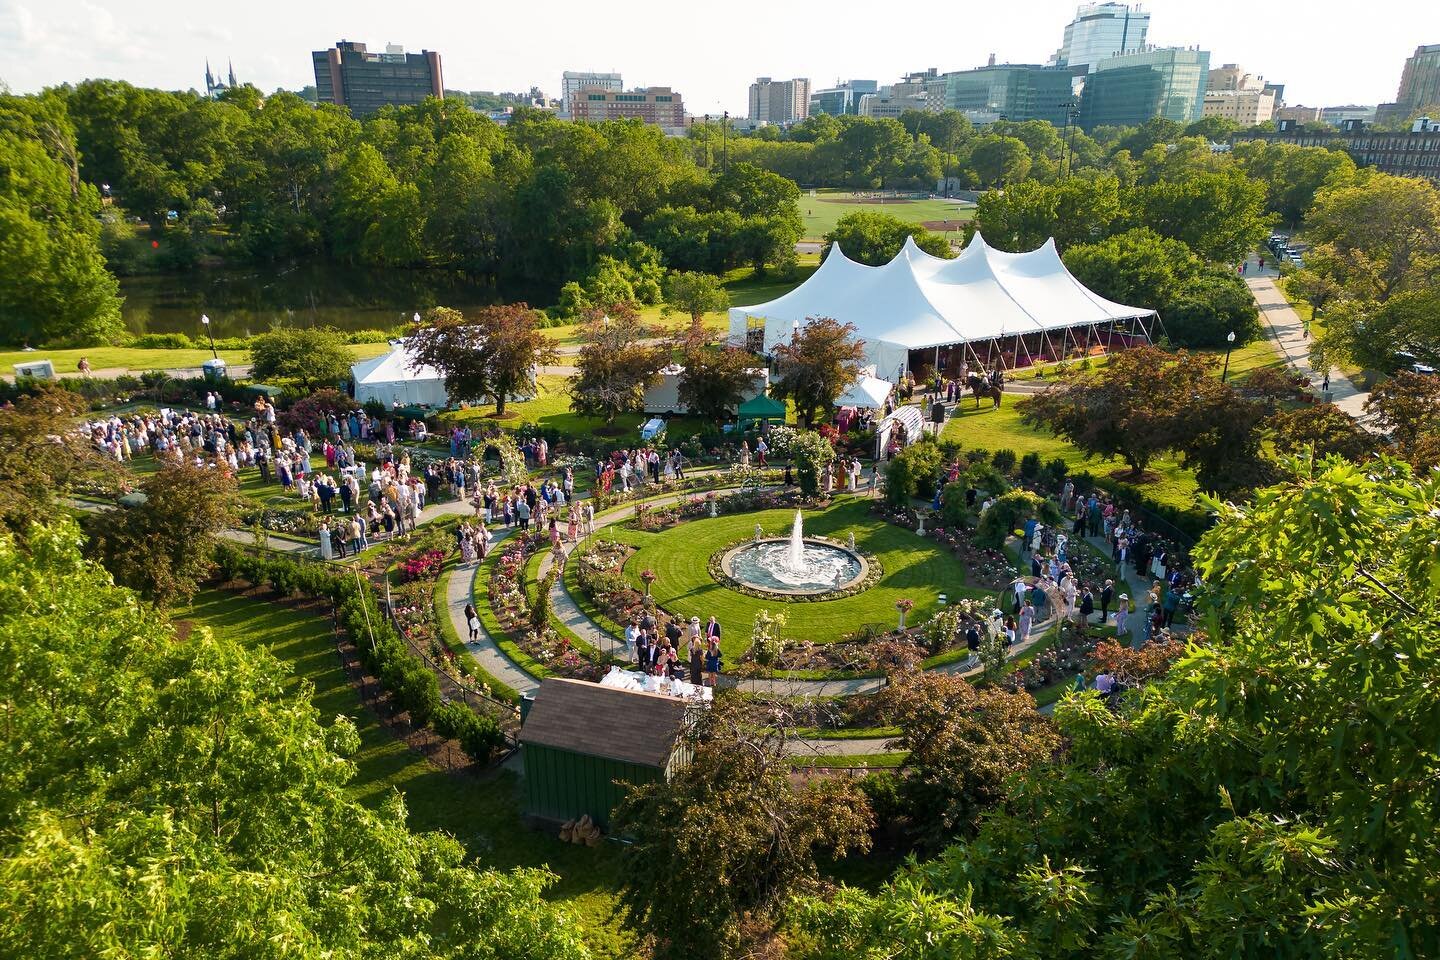 The perfect place for a summer soir&eacute;e.🌹🌹🌹
The James P. Kelleher Rose Garden in the Back Bay Fens was such a stunning setting for the @bostonparksdept&rsquo;s 26th Annual Rose Garden Party.
.
@mayorwu @peakeventservices @michaelblanchard @th